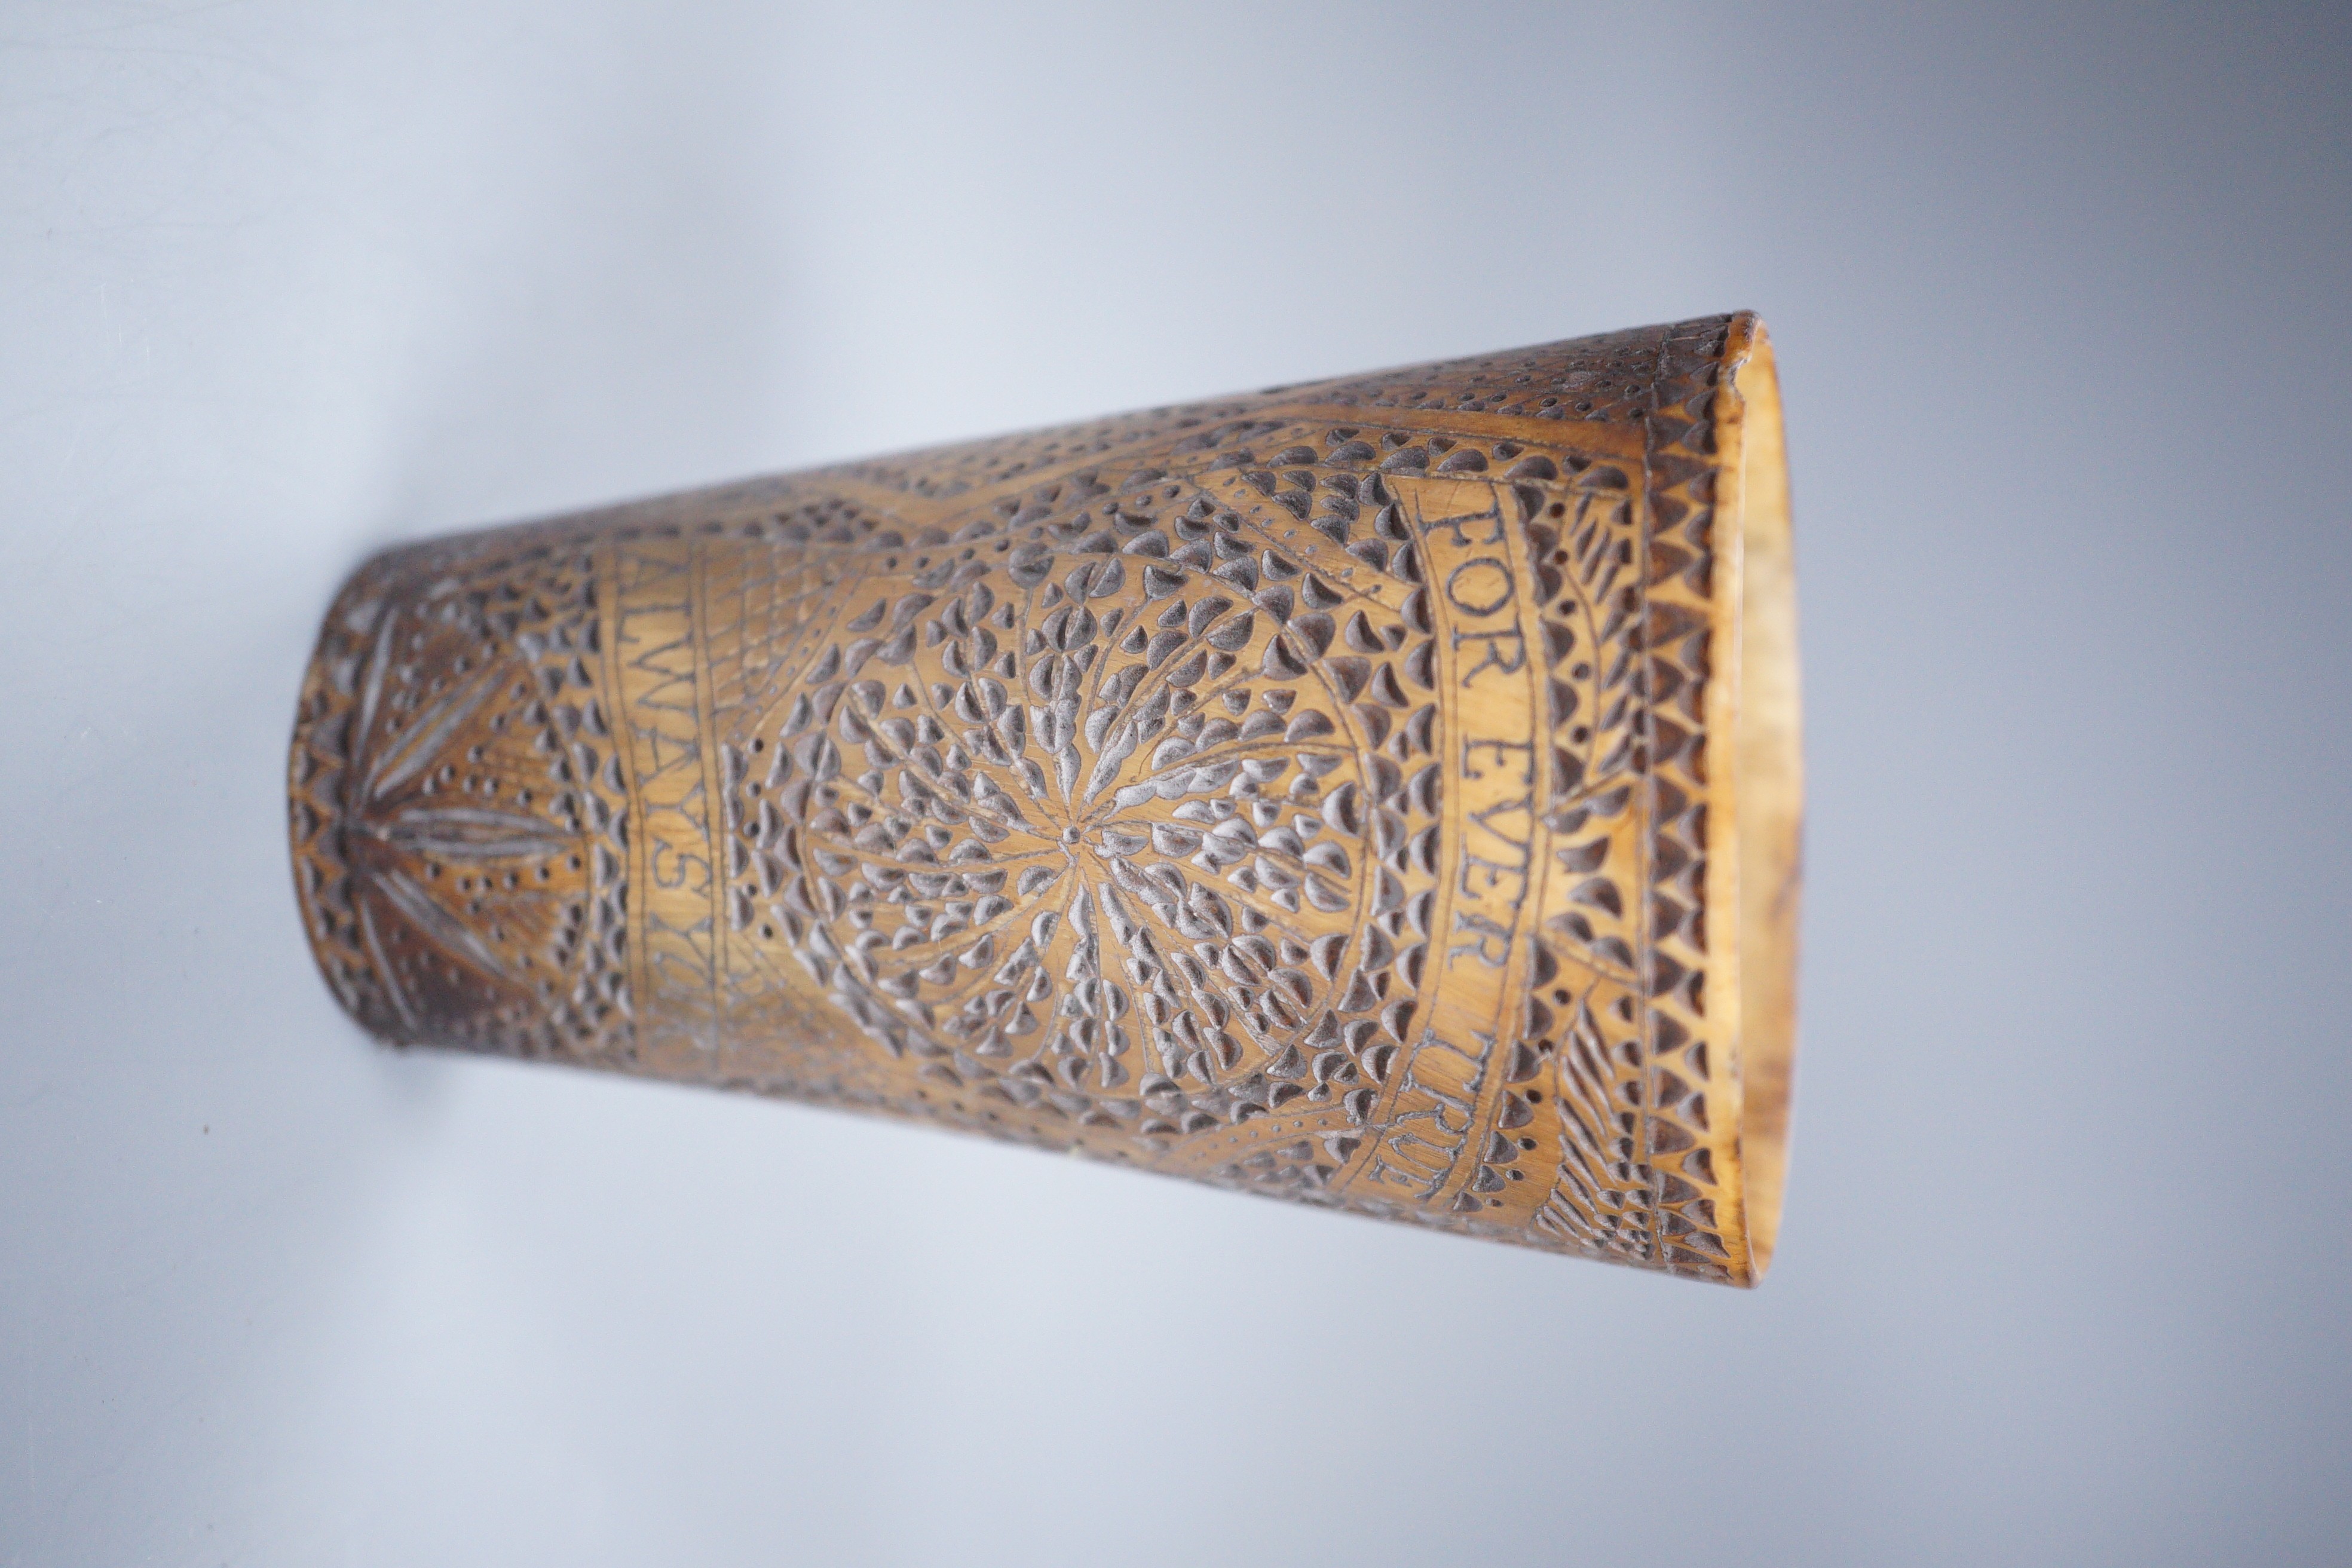 A 19th century carved horn beaker, titled ‘Ship Peru’, dated ‘Feb 12th 1840’, initialled ‘W.M’, the reverse carved ‘FOREVER TRUE ALWAYS YOURS’, height 10cm